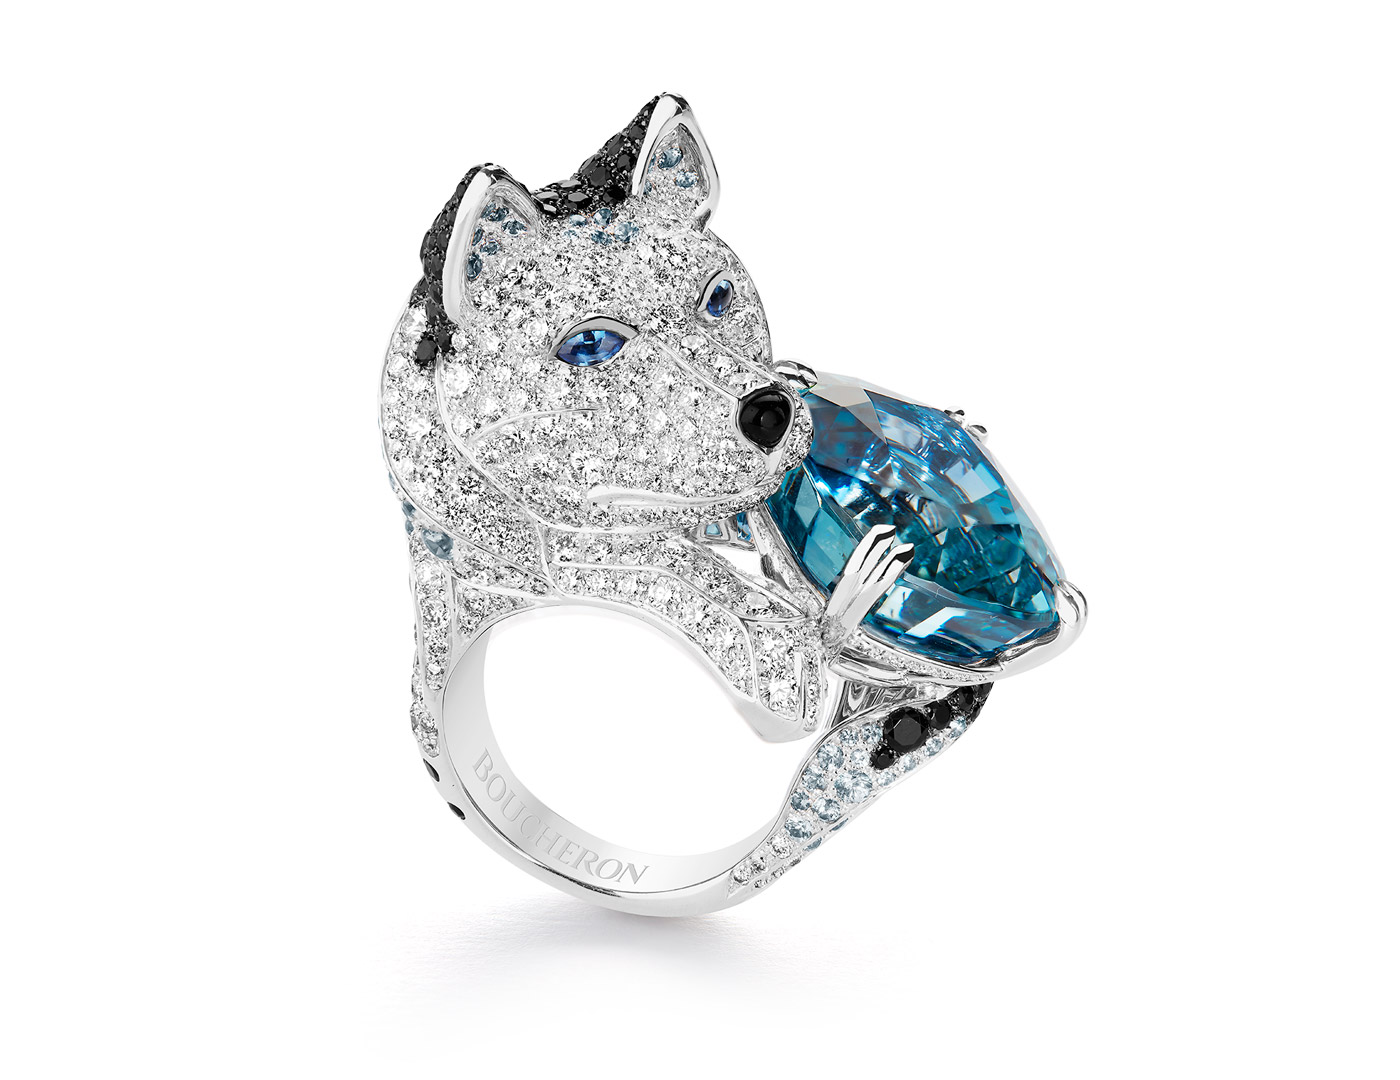 Boucheron Laika ring with aquamarine from L'Hiver Imperiale collection